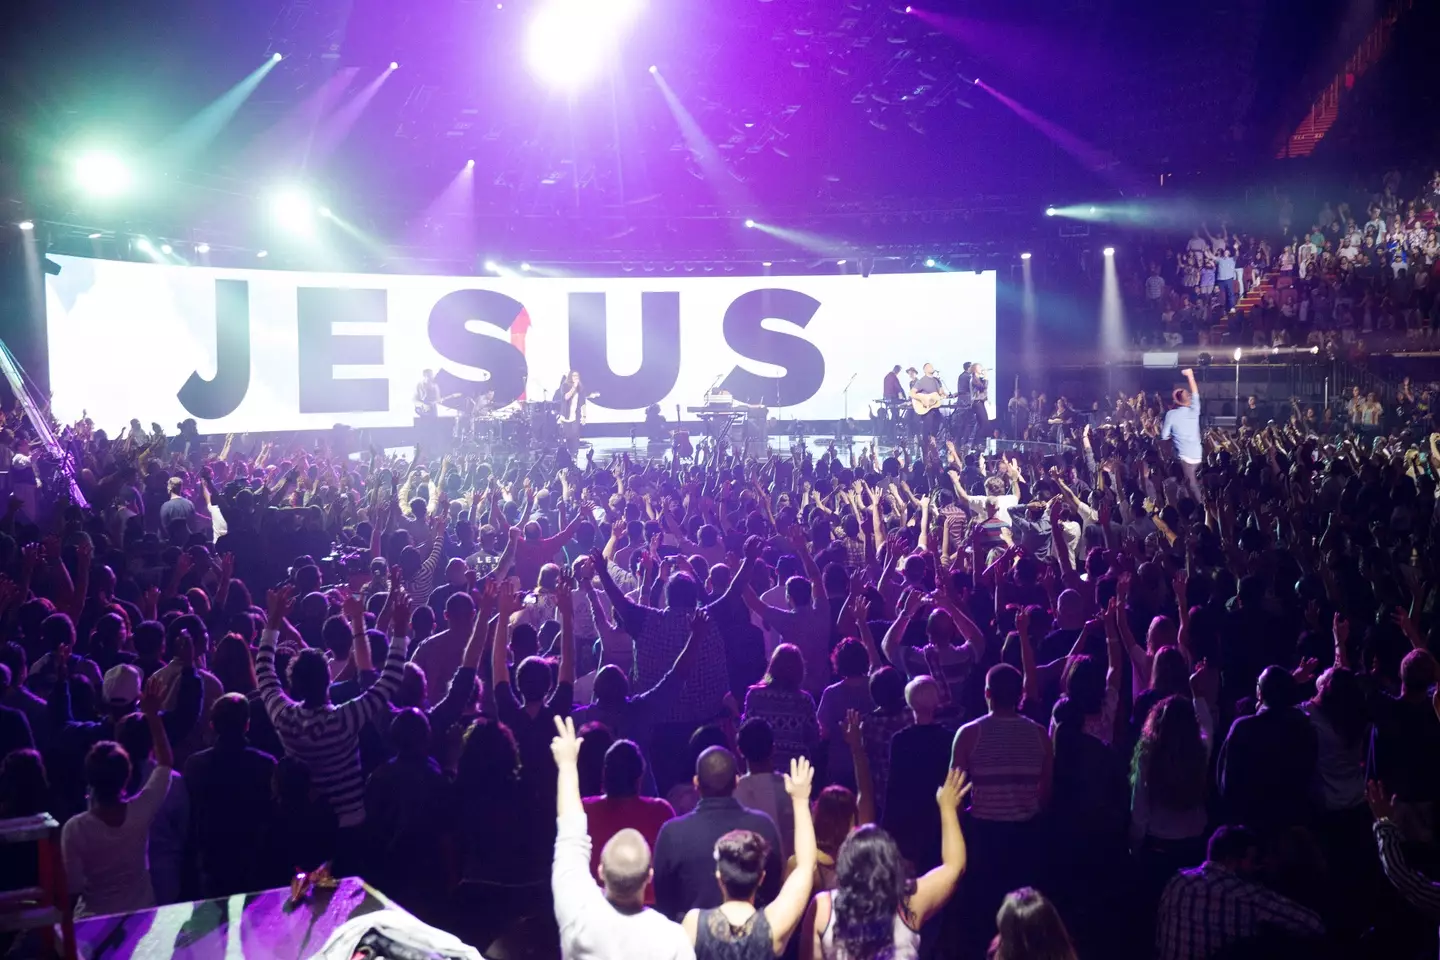 This is what the inside of a Hillsong Church looks like.